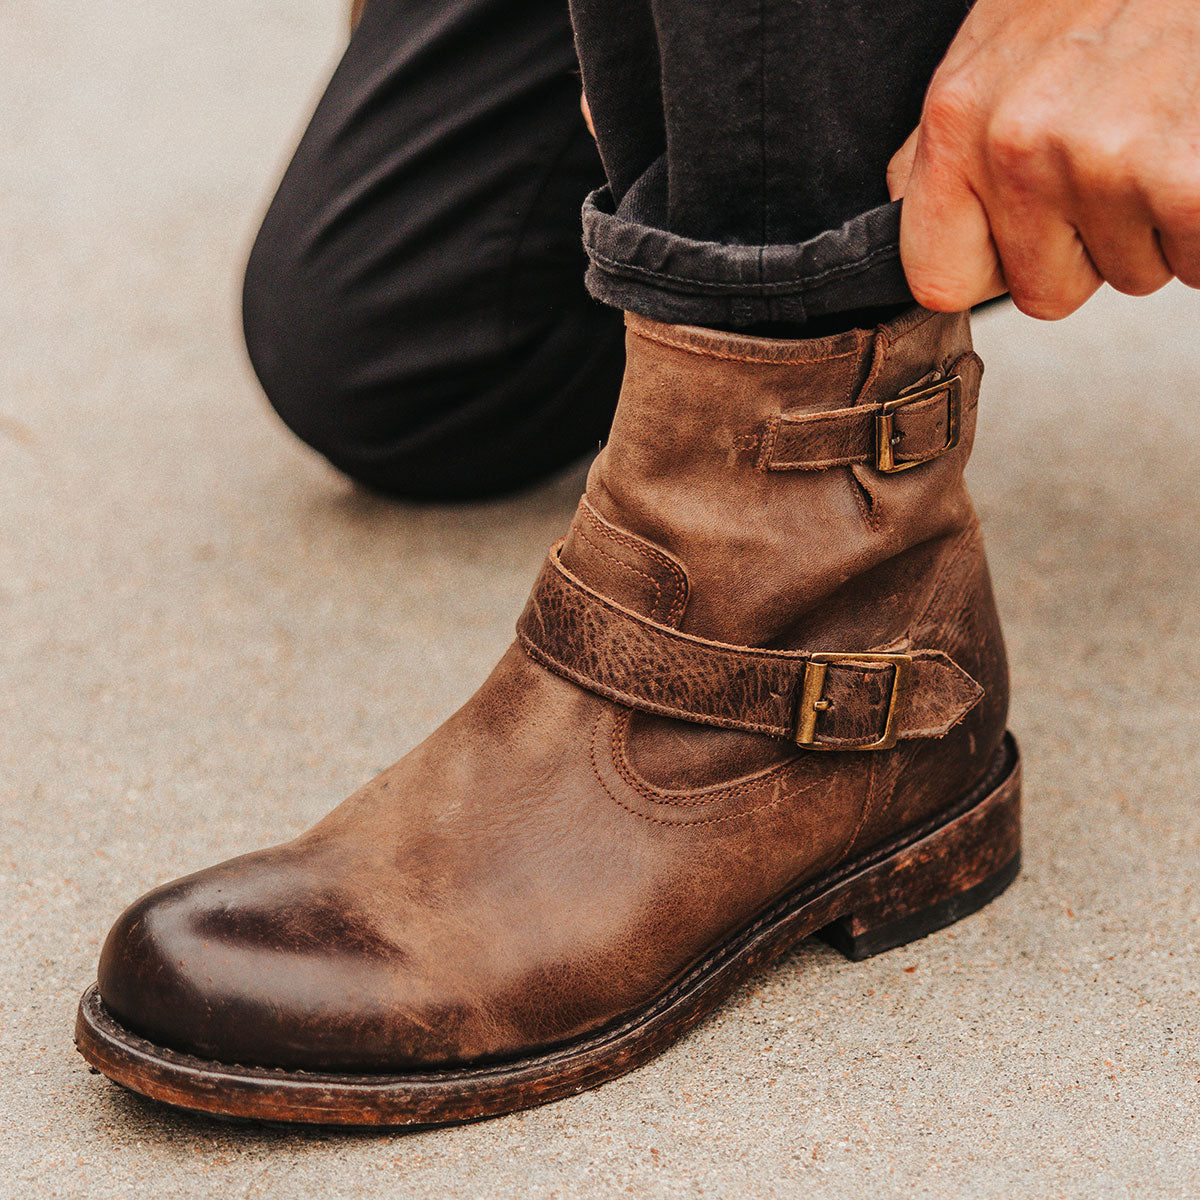 FREEBIRD men's Charles brown leather boot with full grain leather, dual leather straps and a rounded toe